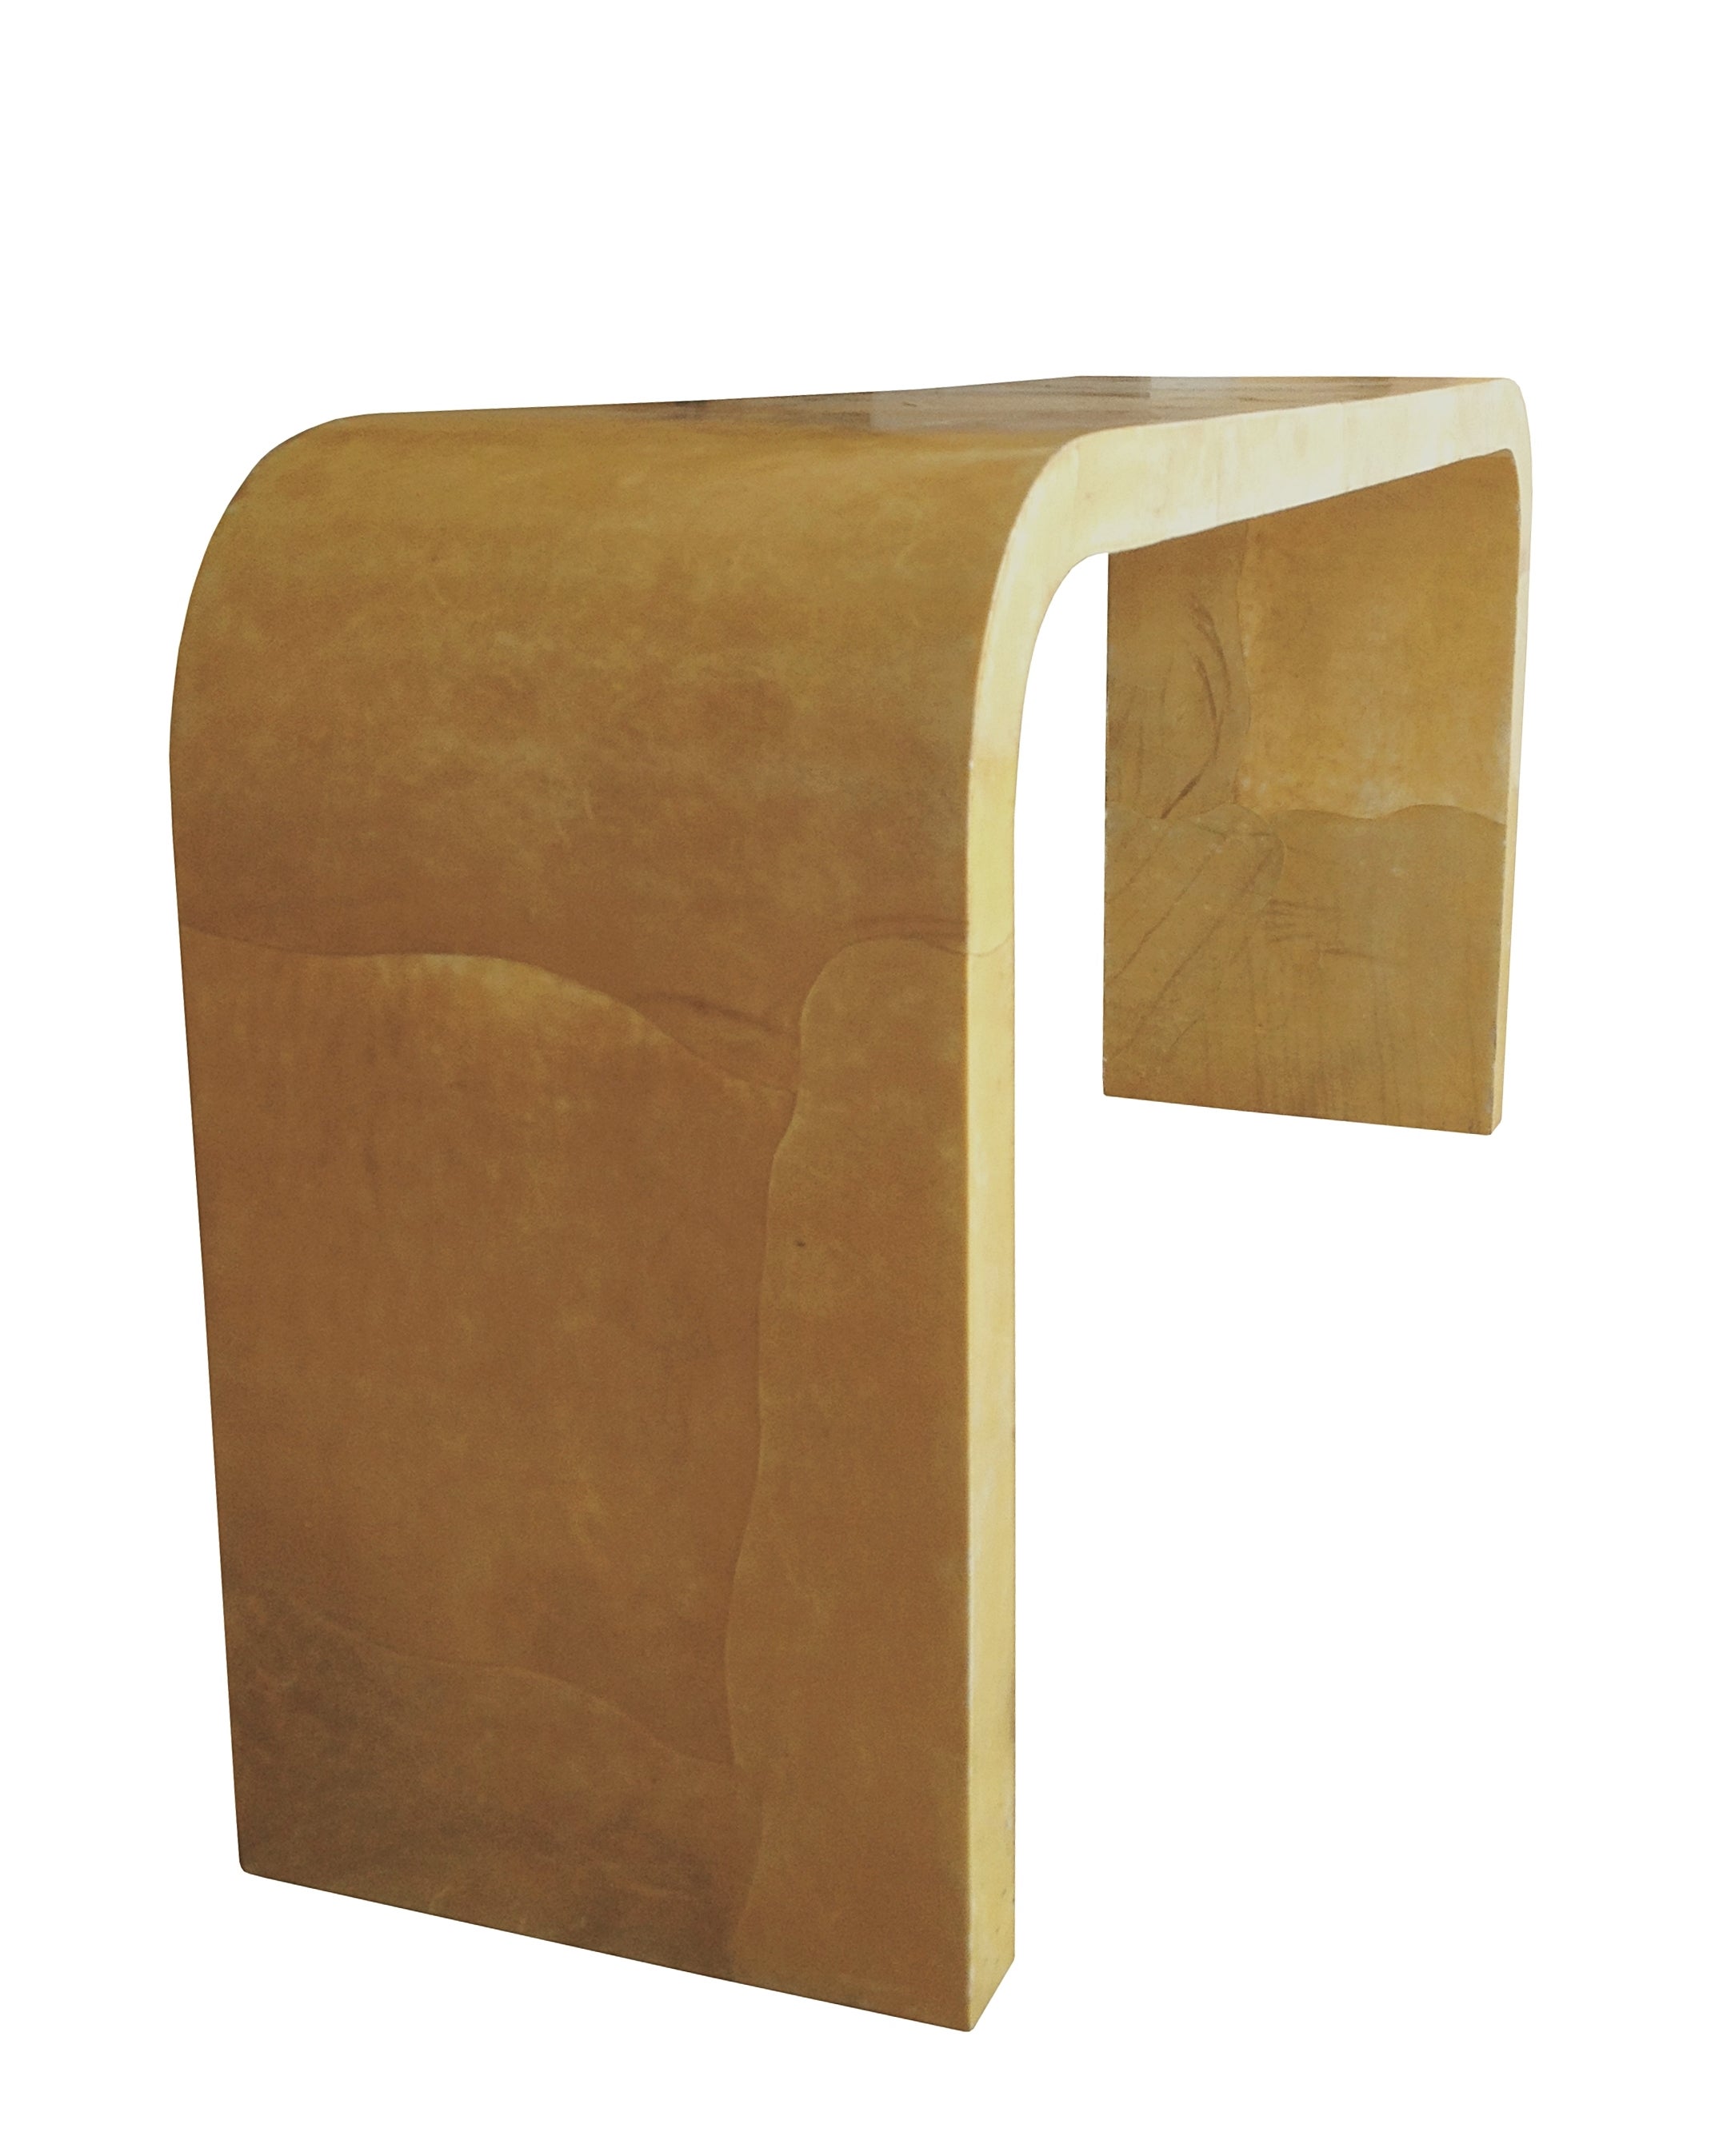 Waterfall Console Table in Goatskin Parchment